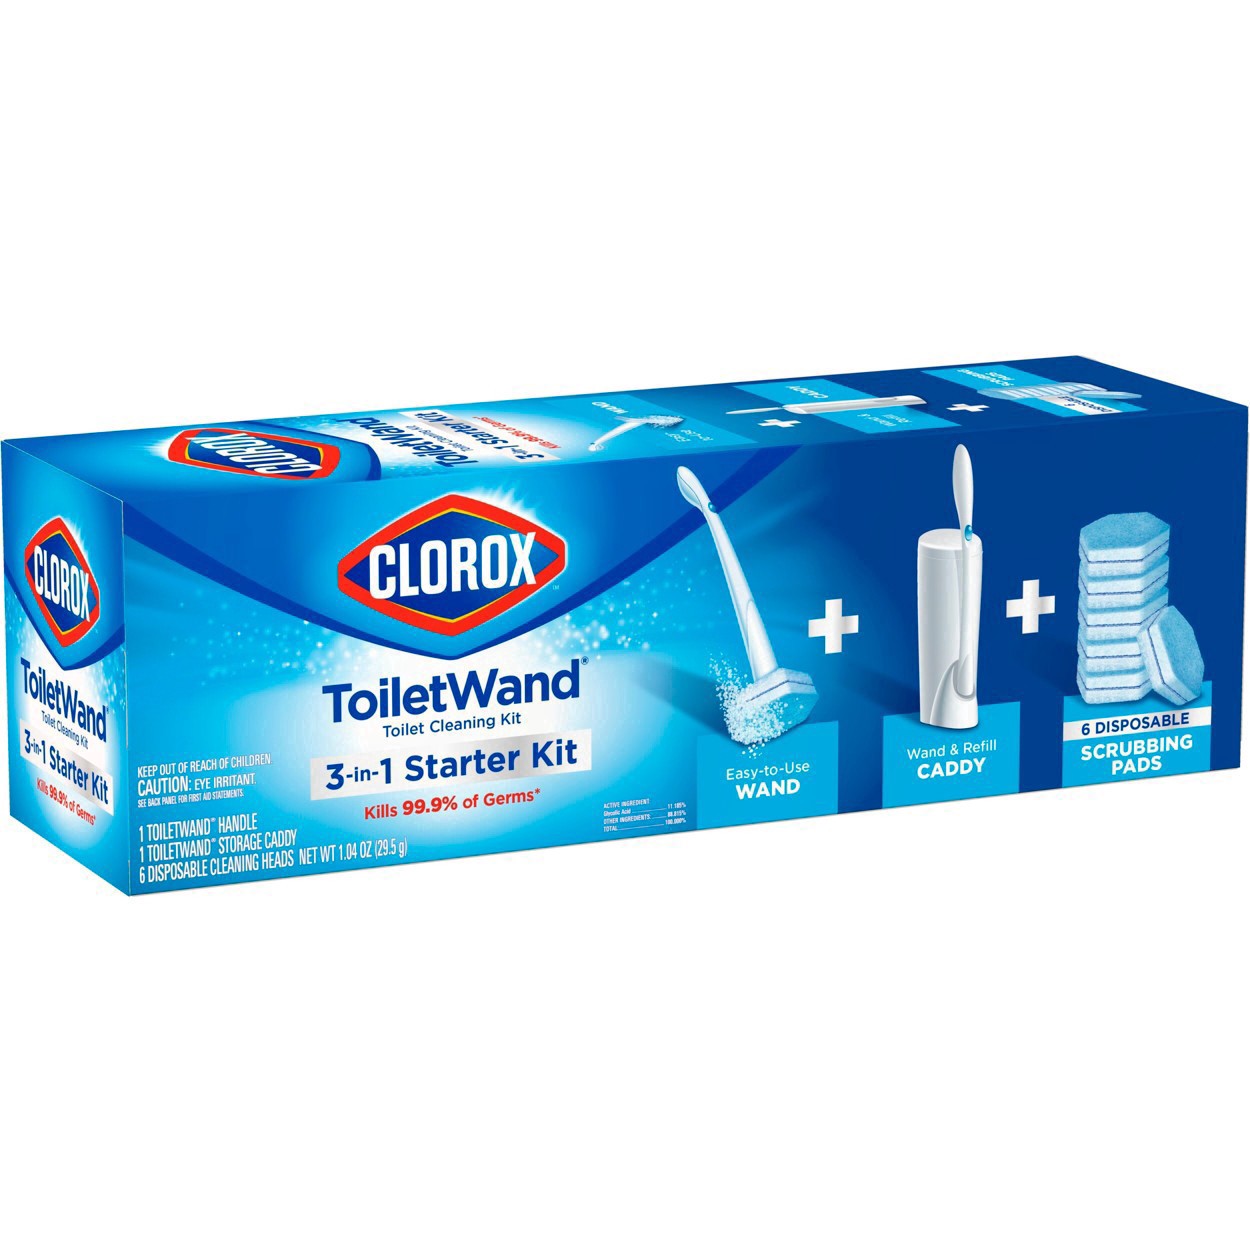 slide 83 of 176, Clorox Toilet Wand 3-in-1 Starter Toliet Cleaning Kit, 1 ct